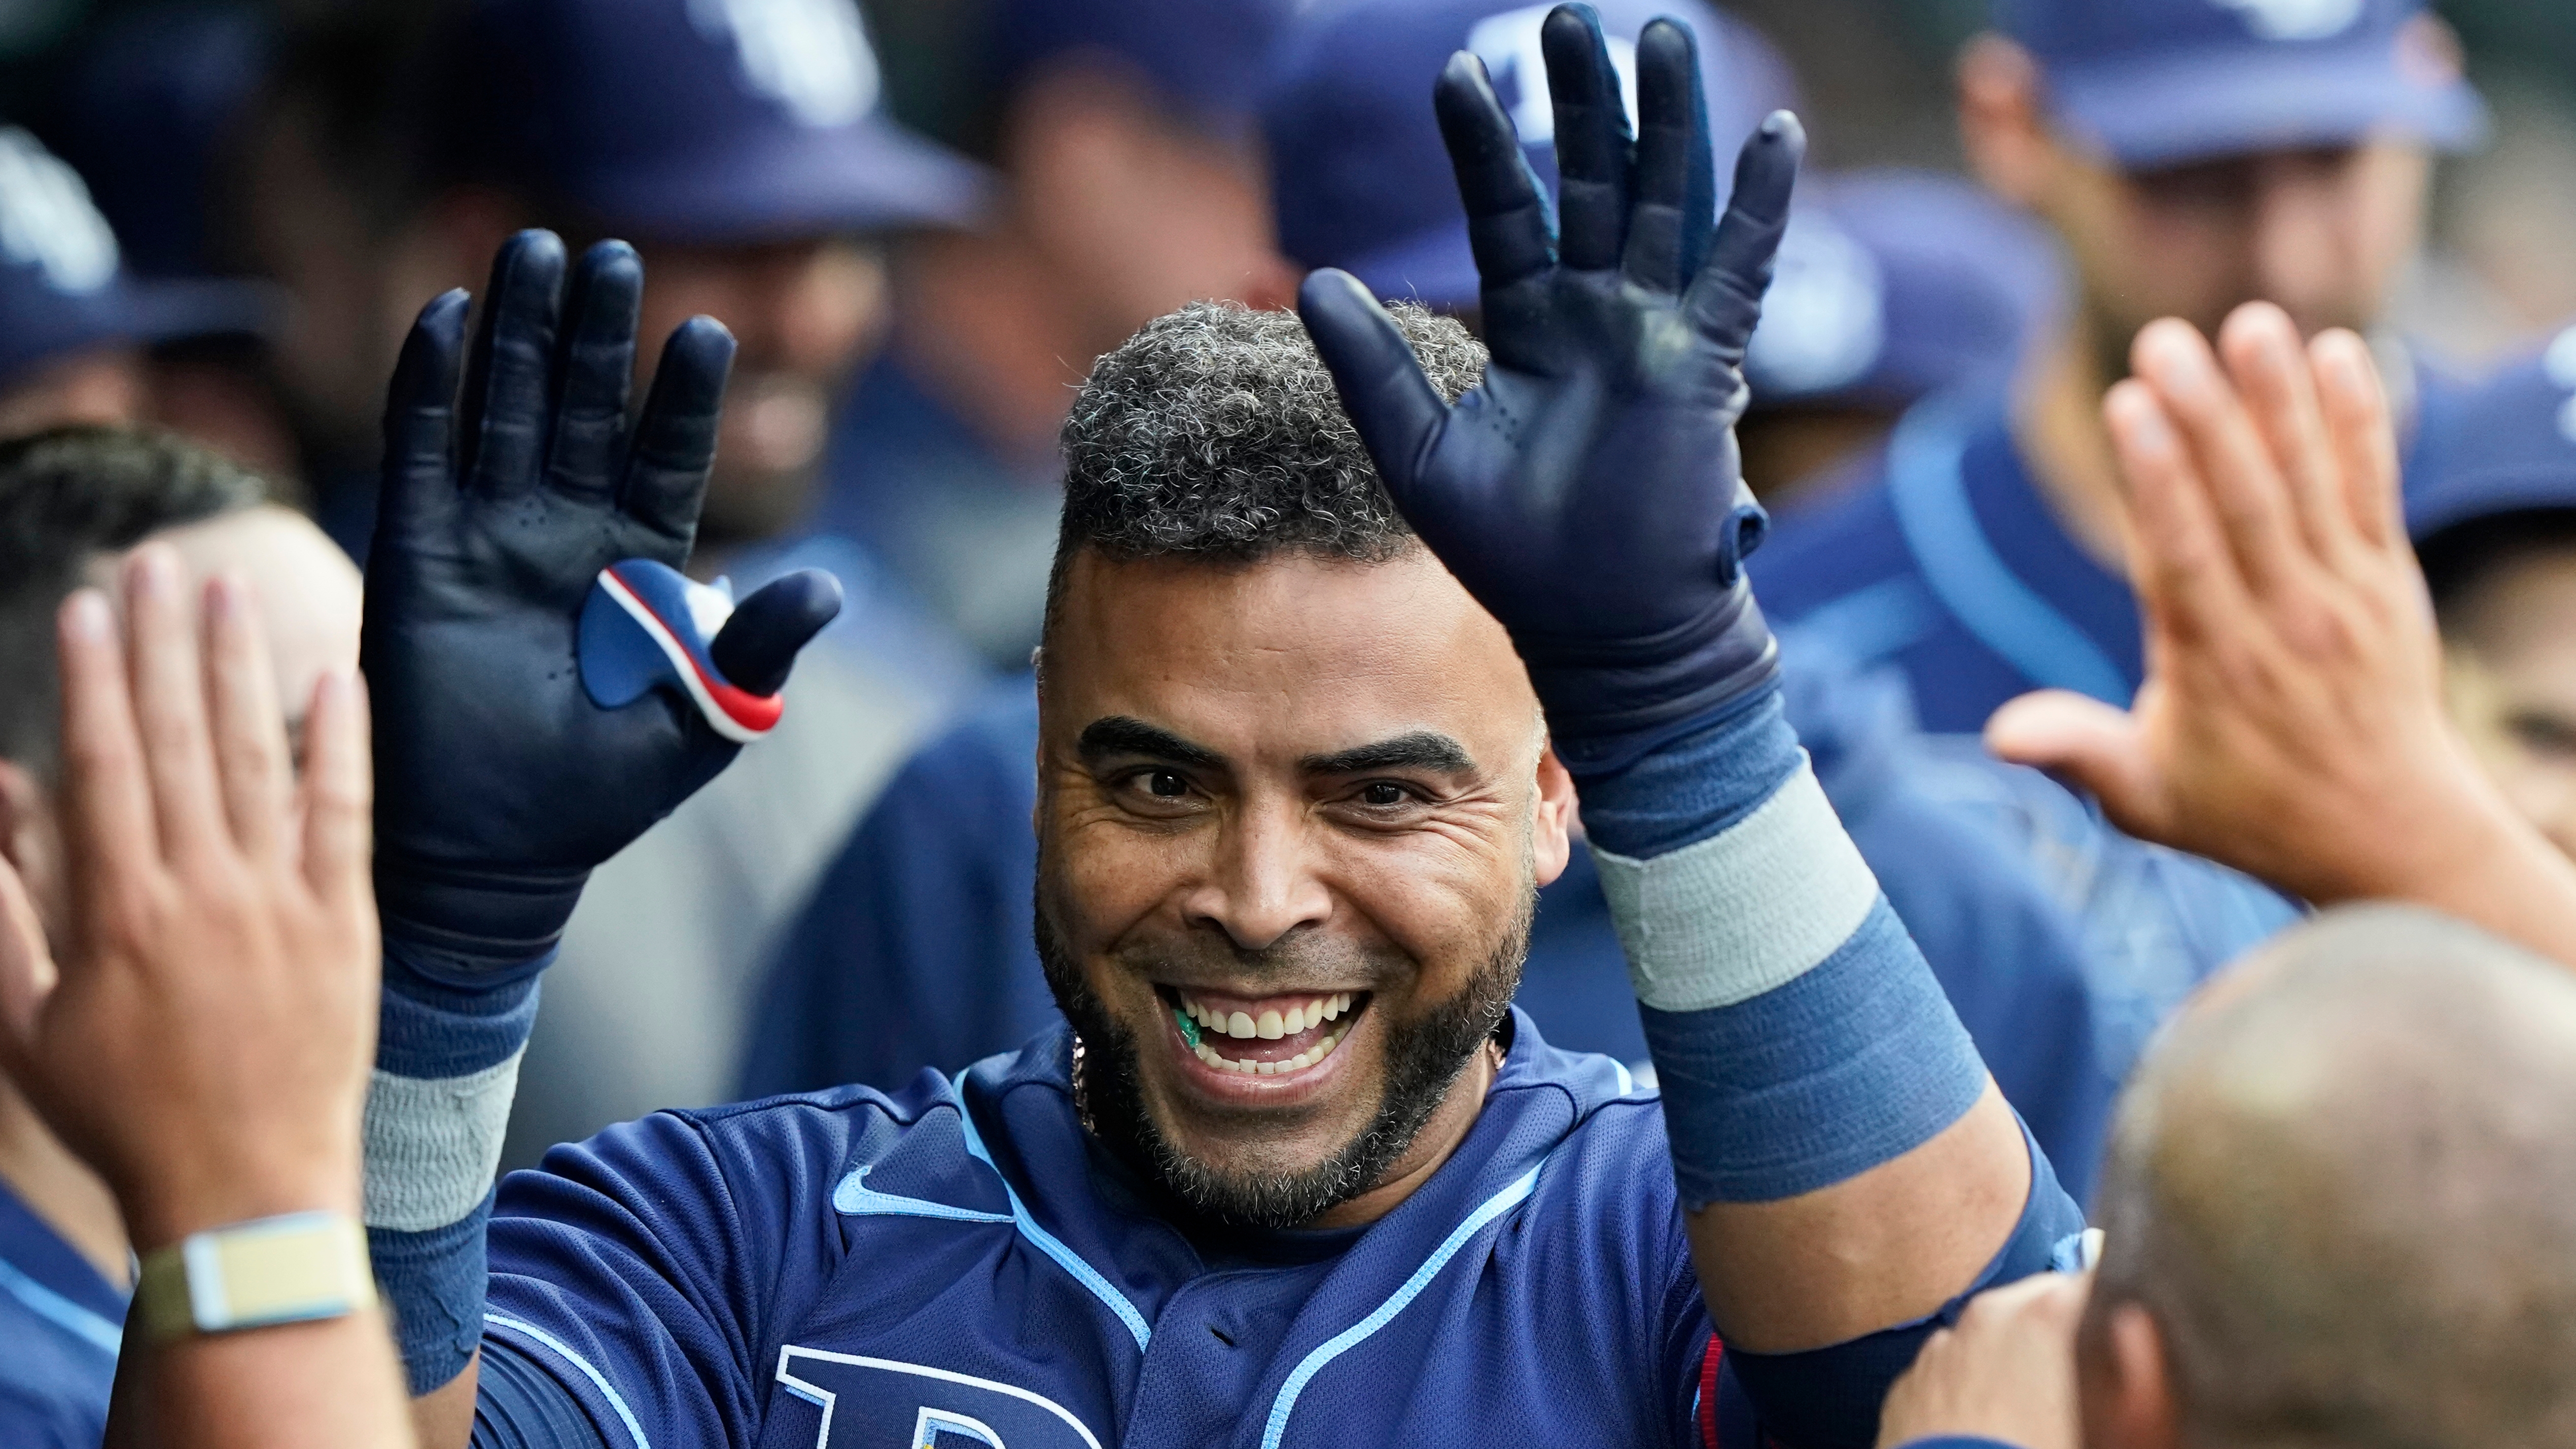 The real reasons the Rays acquired Nelson Cruz